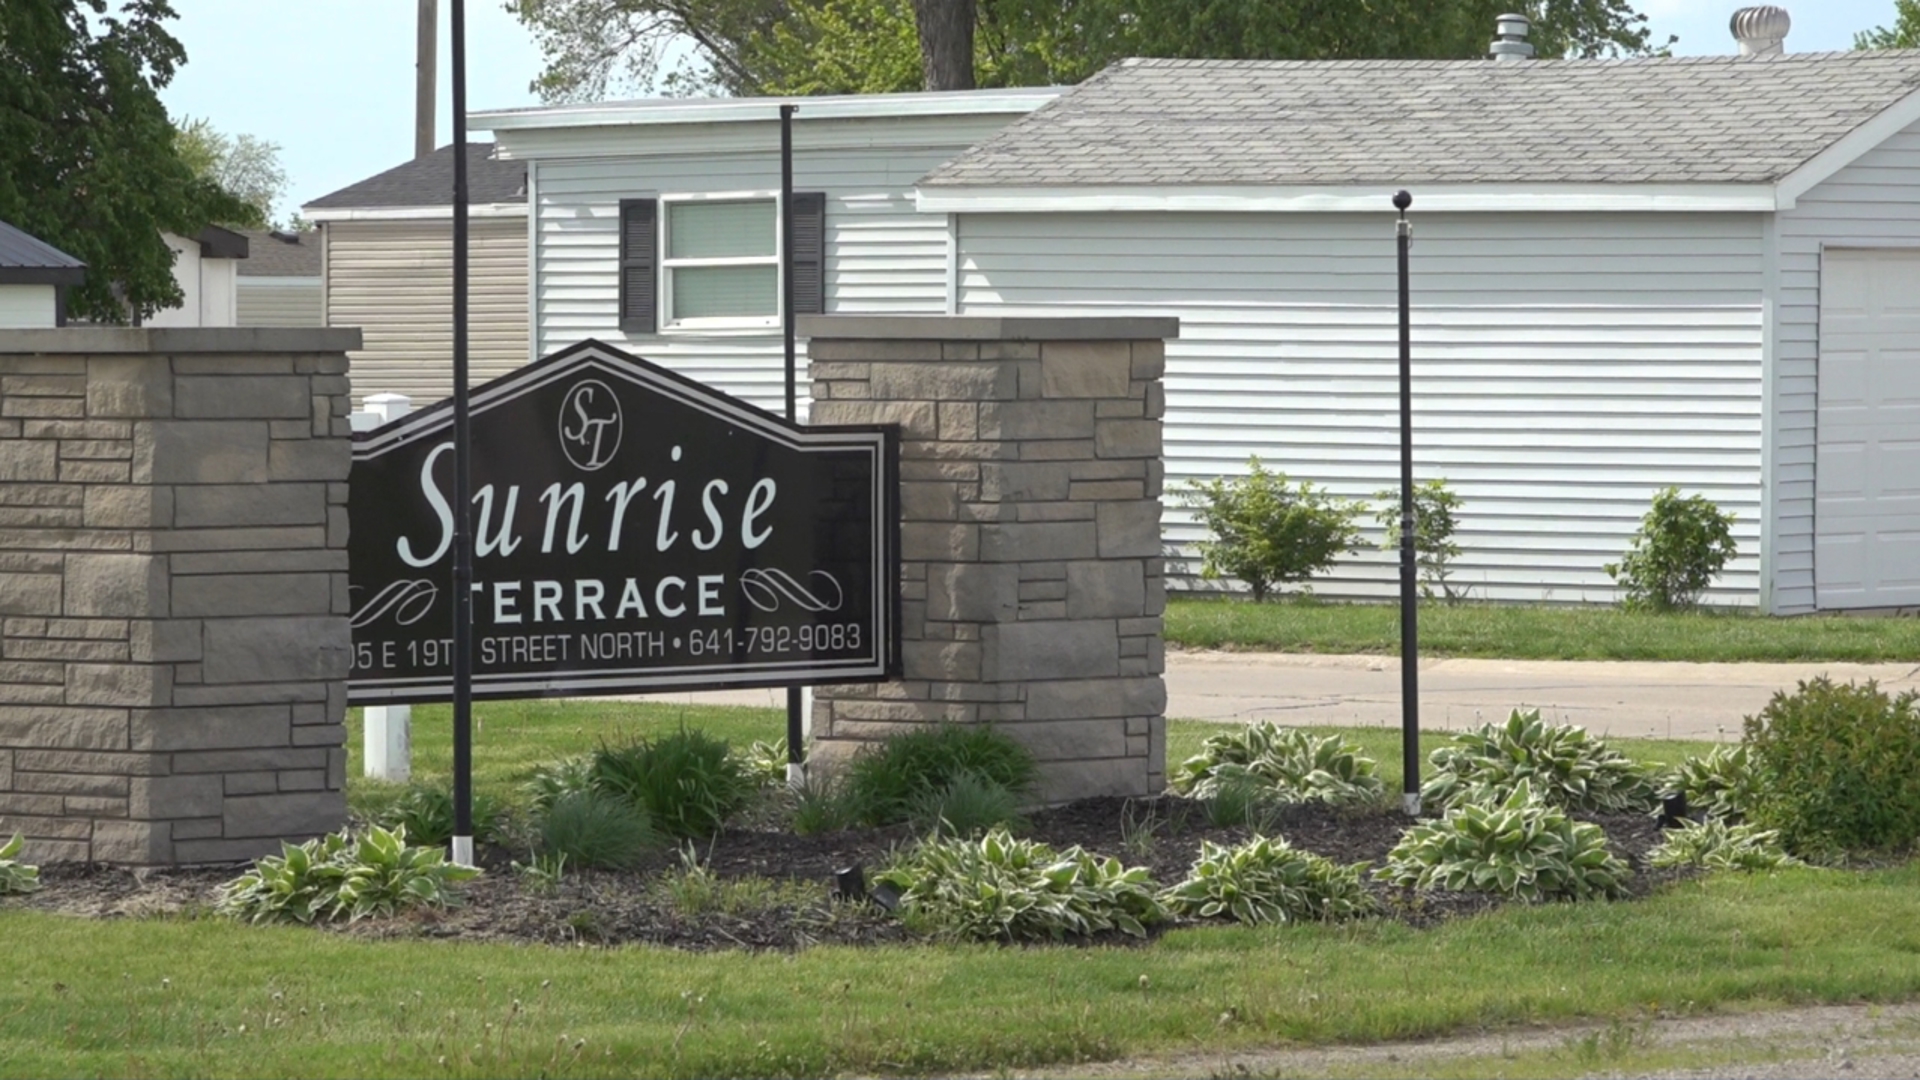 Sunrise Terrace in Newton has left residents outraged after announcing they will be closing their storm shelter, leaving tenants with nowhere to go during storms.